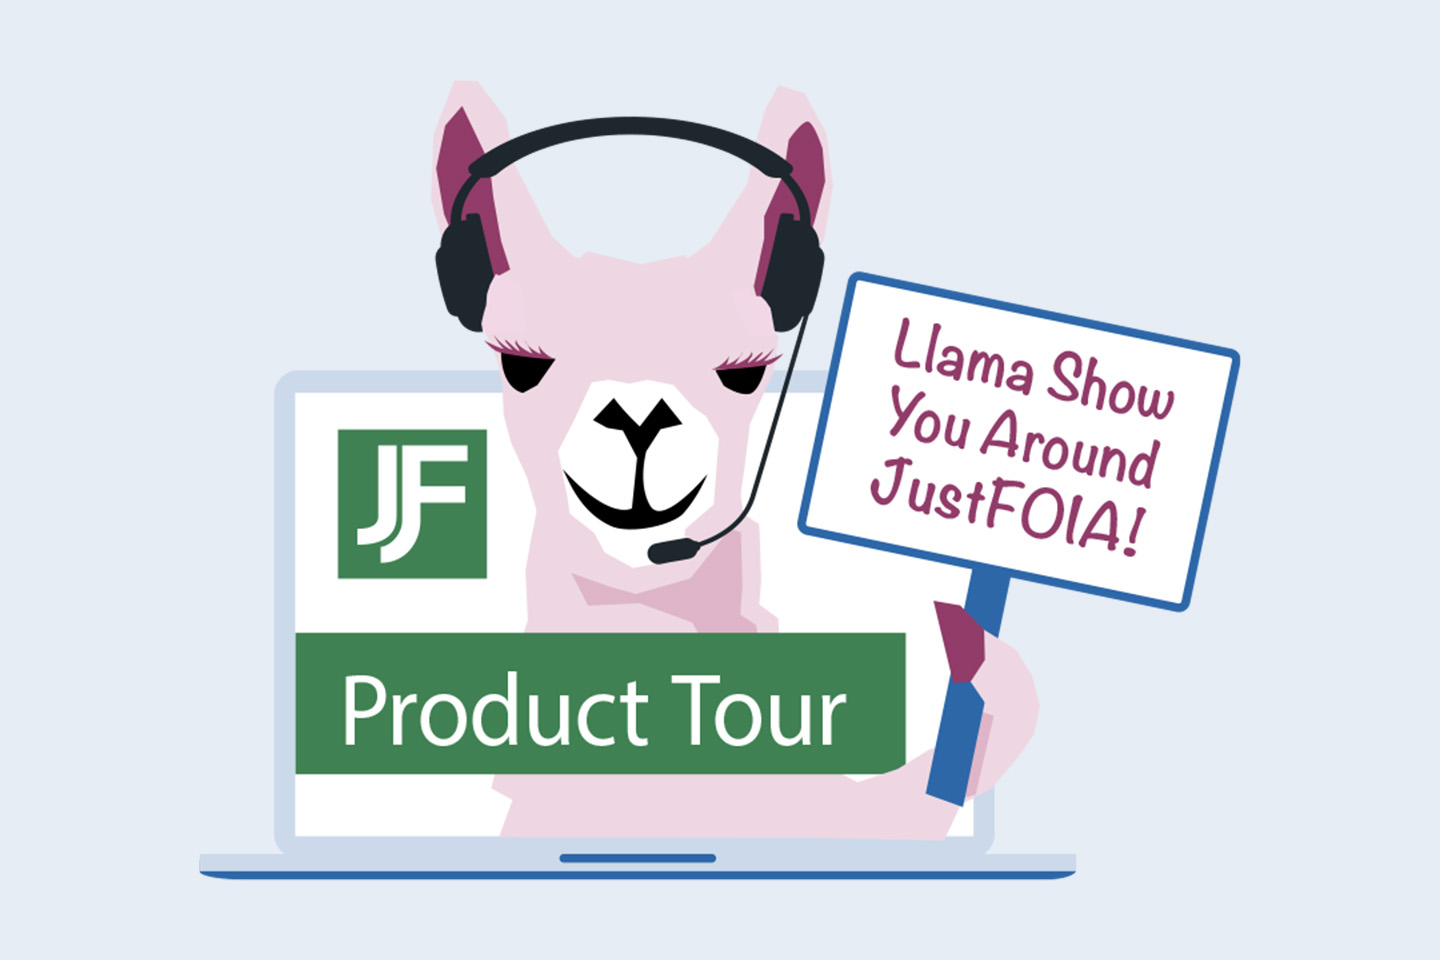 JustFOIA product tour graphic